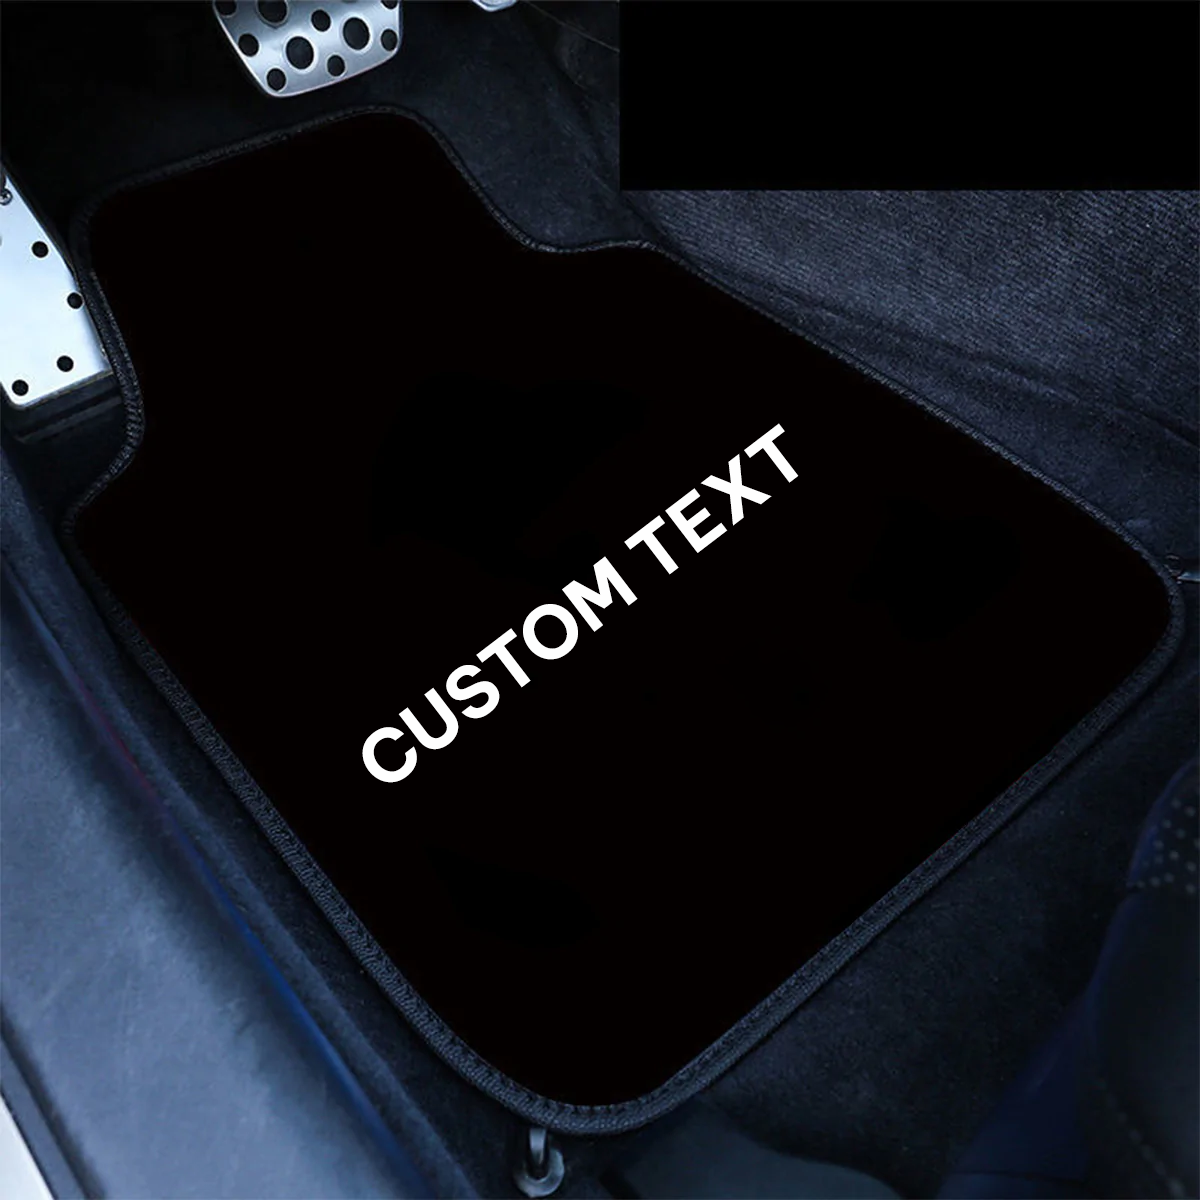 Custom Text For Carpet Floor Mats Set of 4pcs, Compatible with All Cars, Fit Car Floor Mats, All Weather Protection, Universal Type IN13984